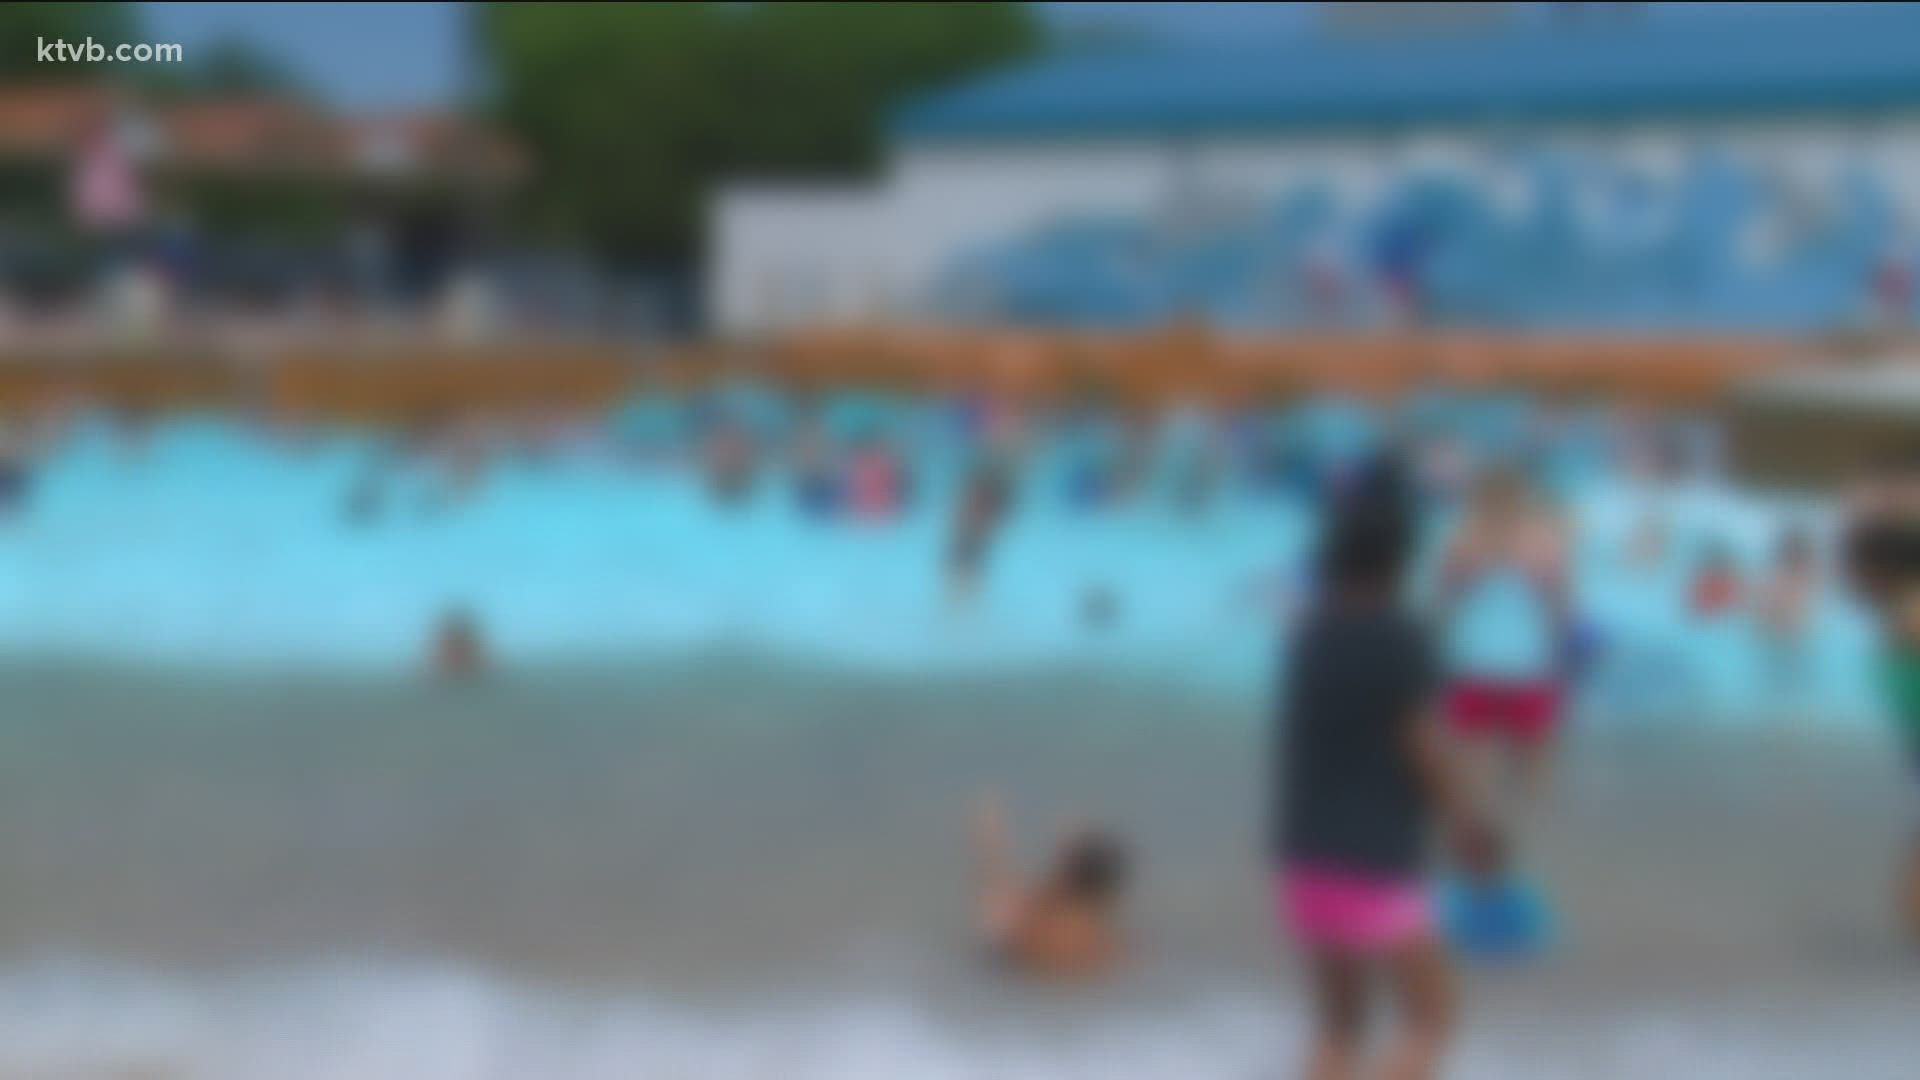 The man is charged with misdemeanor battery. He's accused of inappropriately touching a girl in the wave pool.